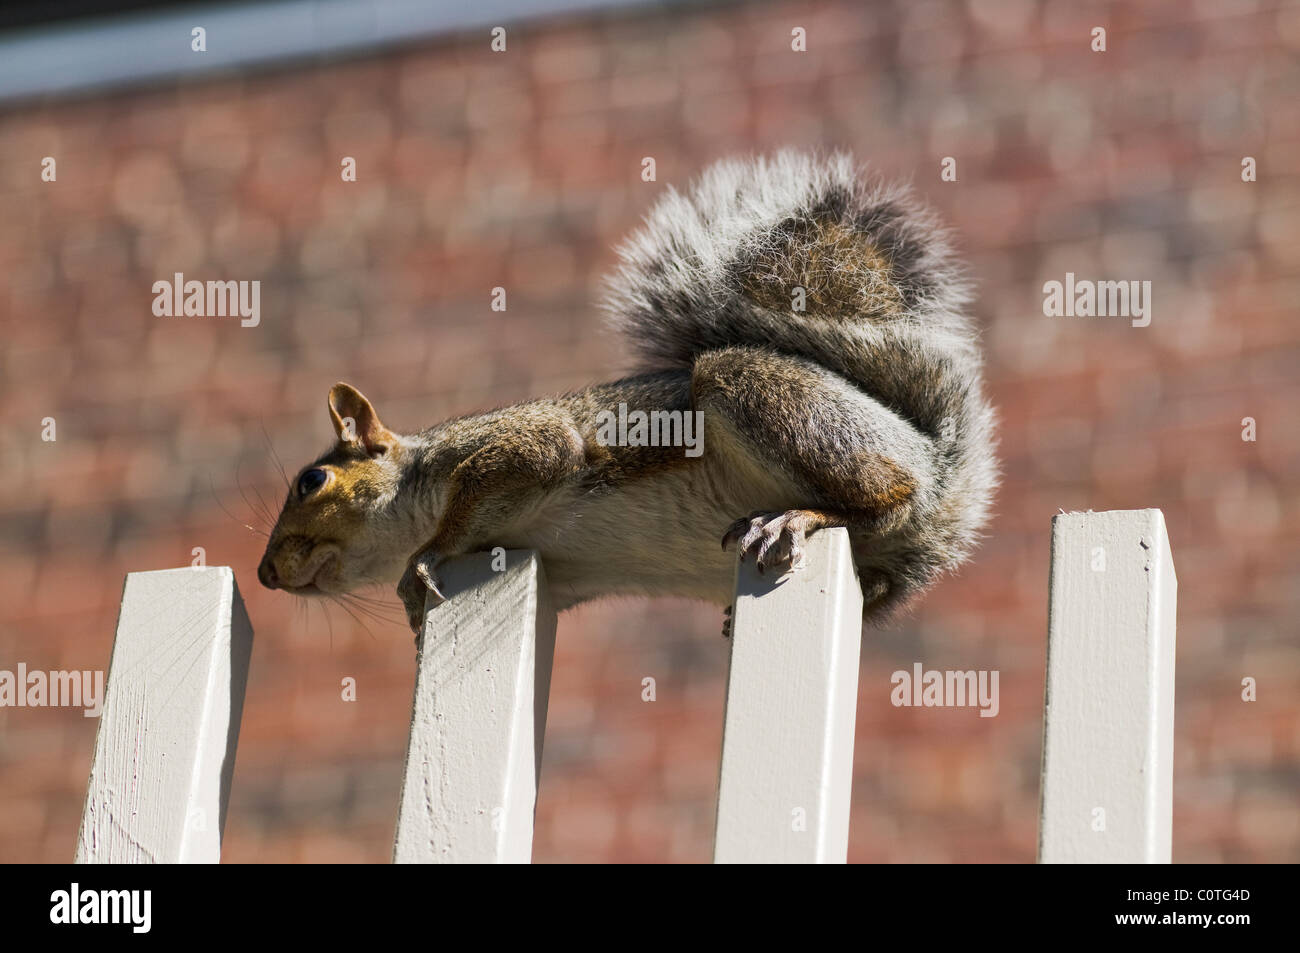 A squirrel  perched on top of a fence Stock Photo